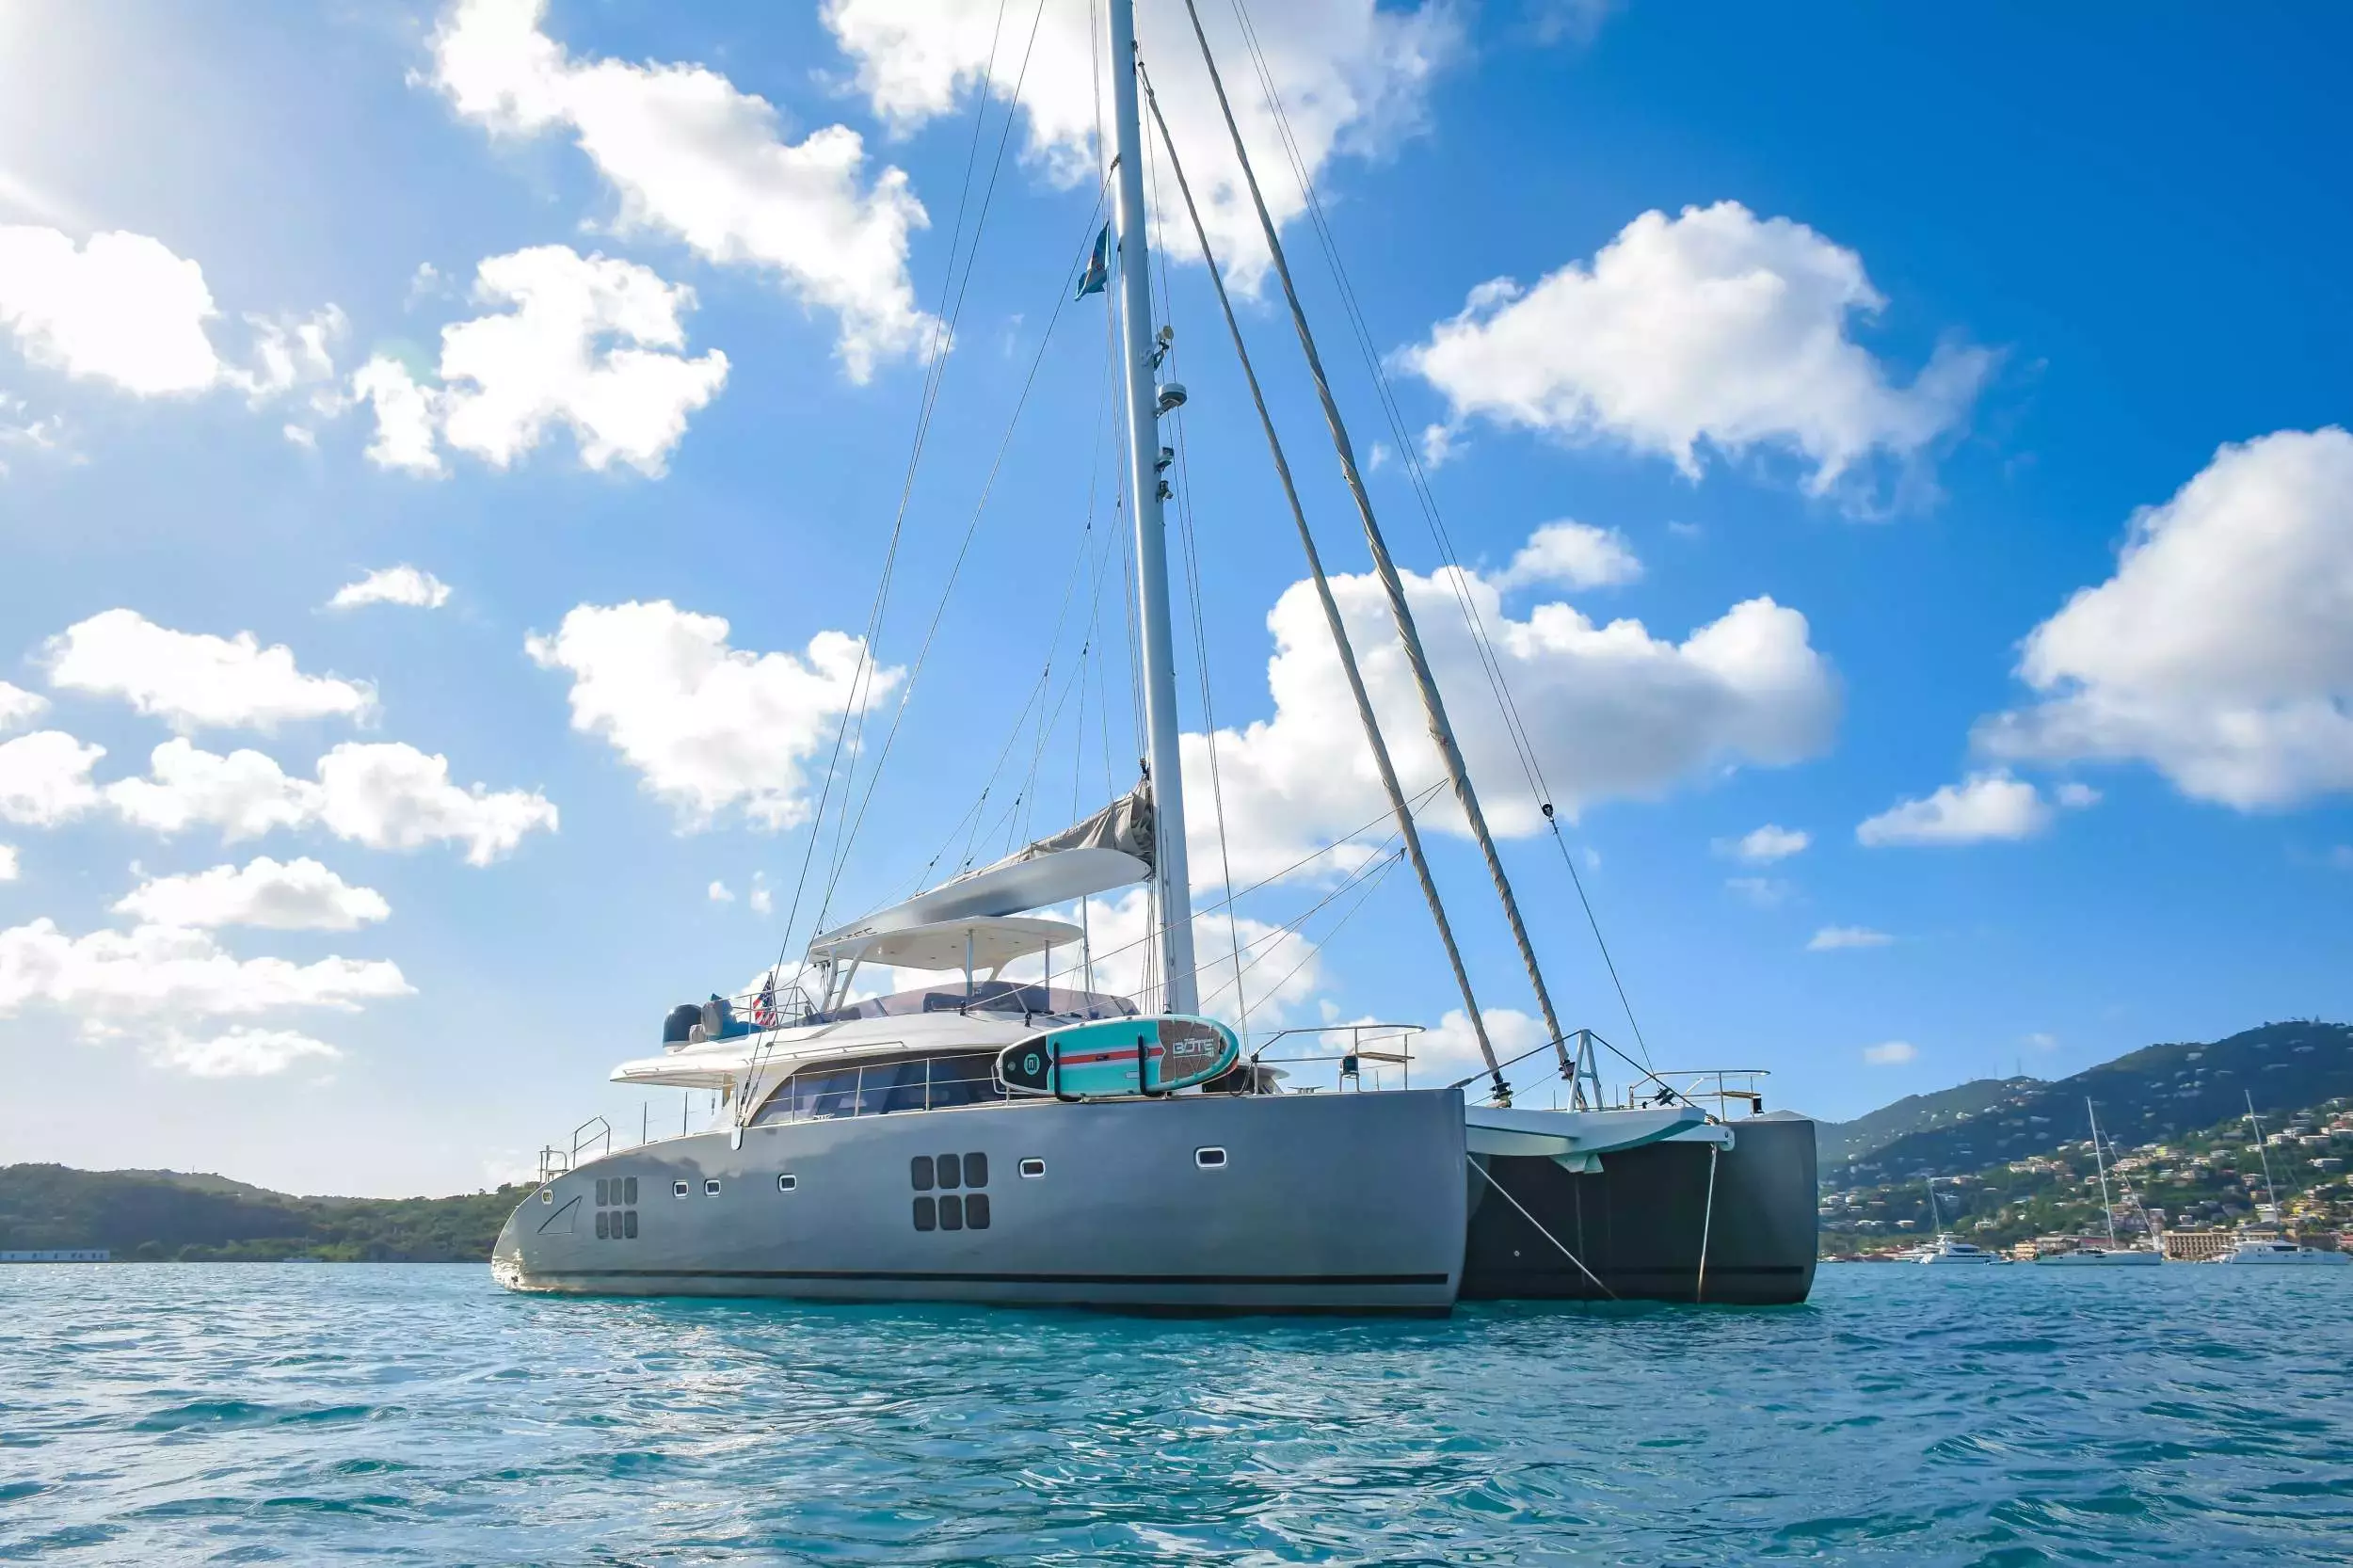 Excess by Sunreef Yachts - Top rates for a Rental of a private Luxury Catamaran in Puerto Rico